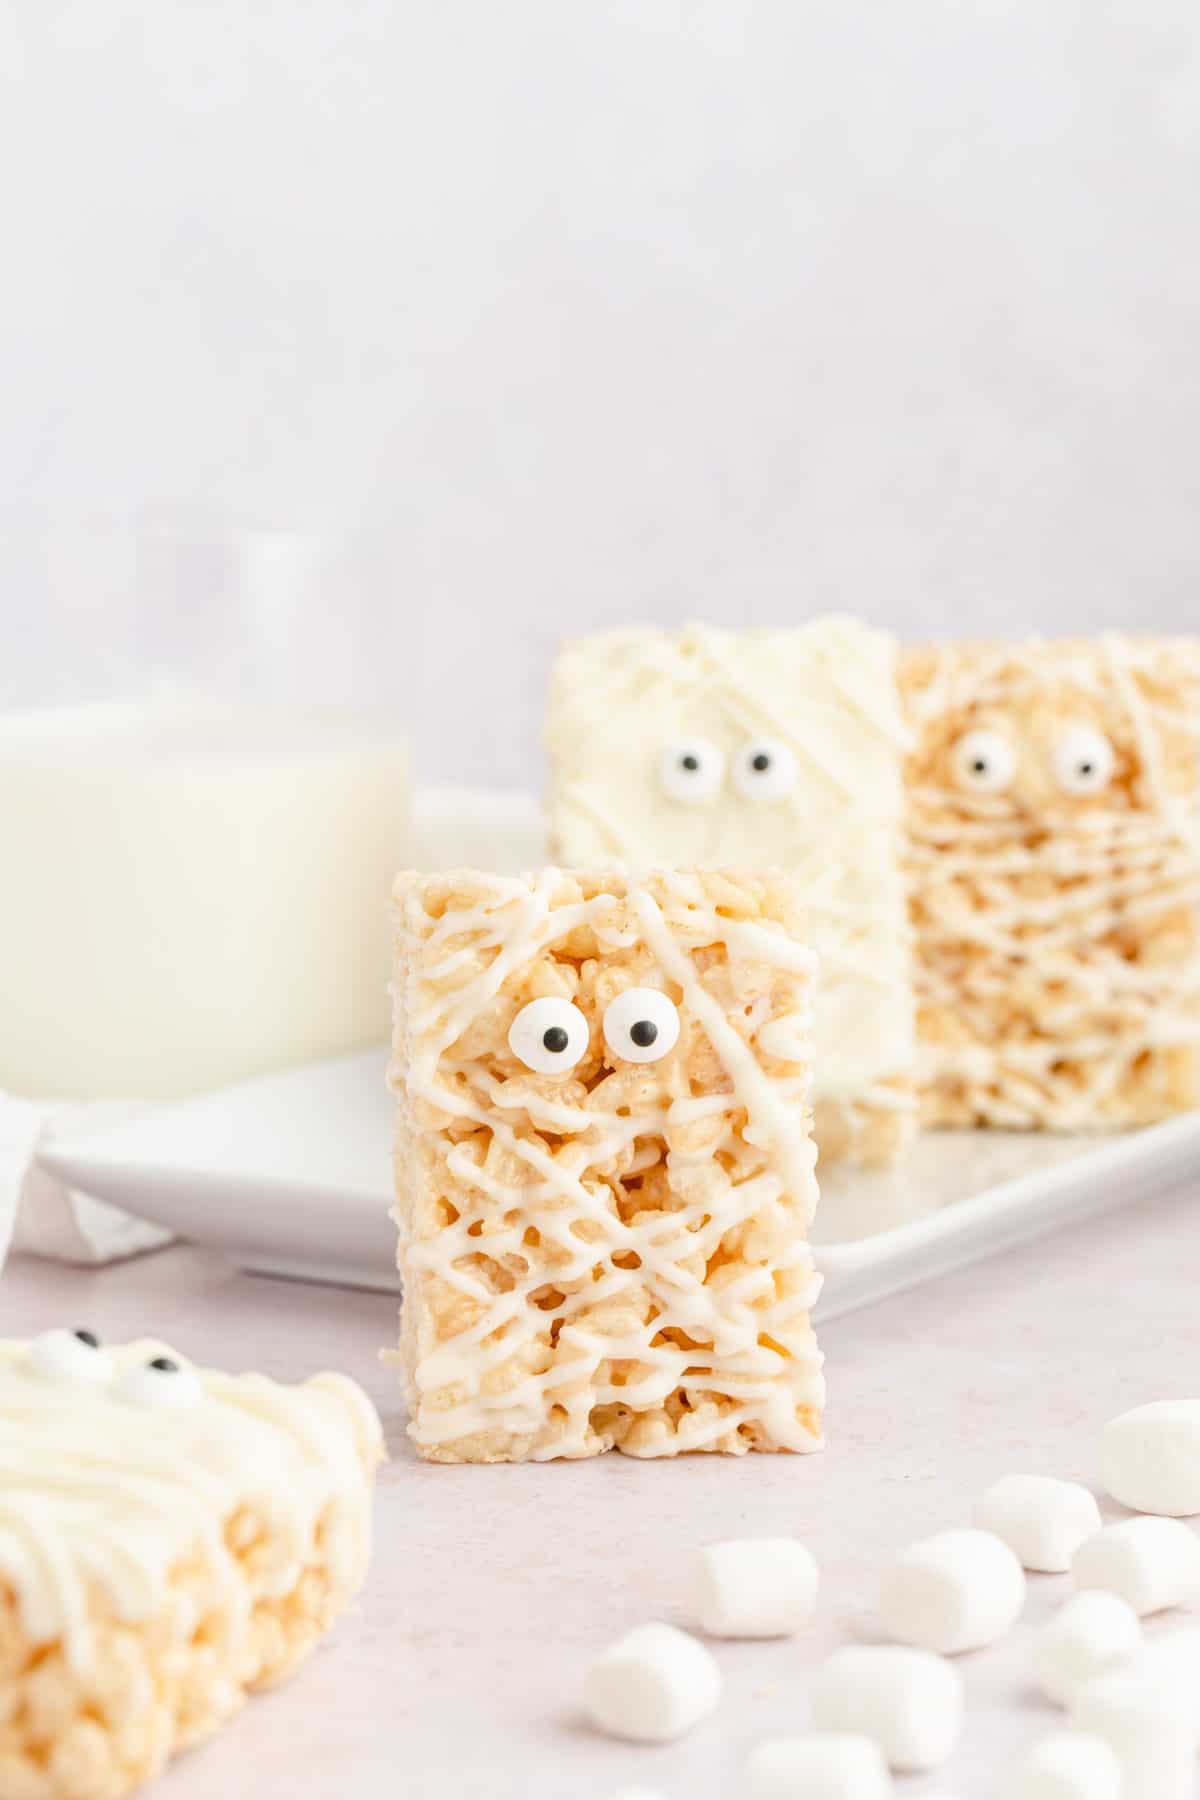 Rice krispie treats decorated like mummies with white chocolate and candy eyes propped up with a glass of milk and marshmallows.